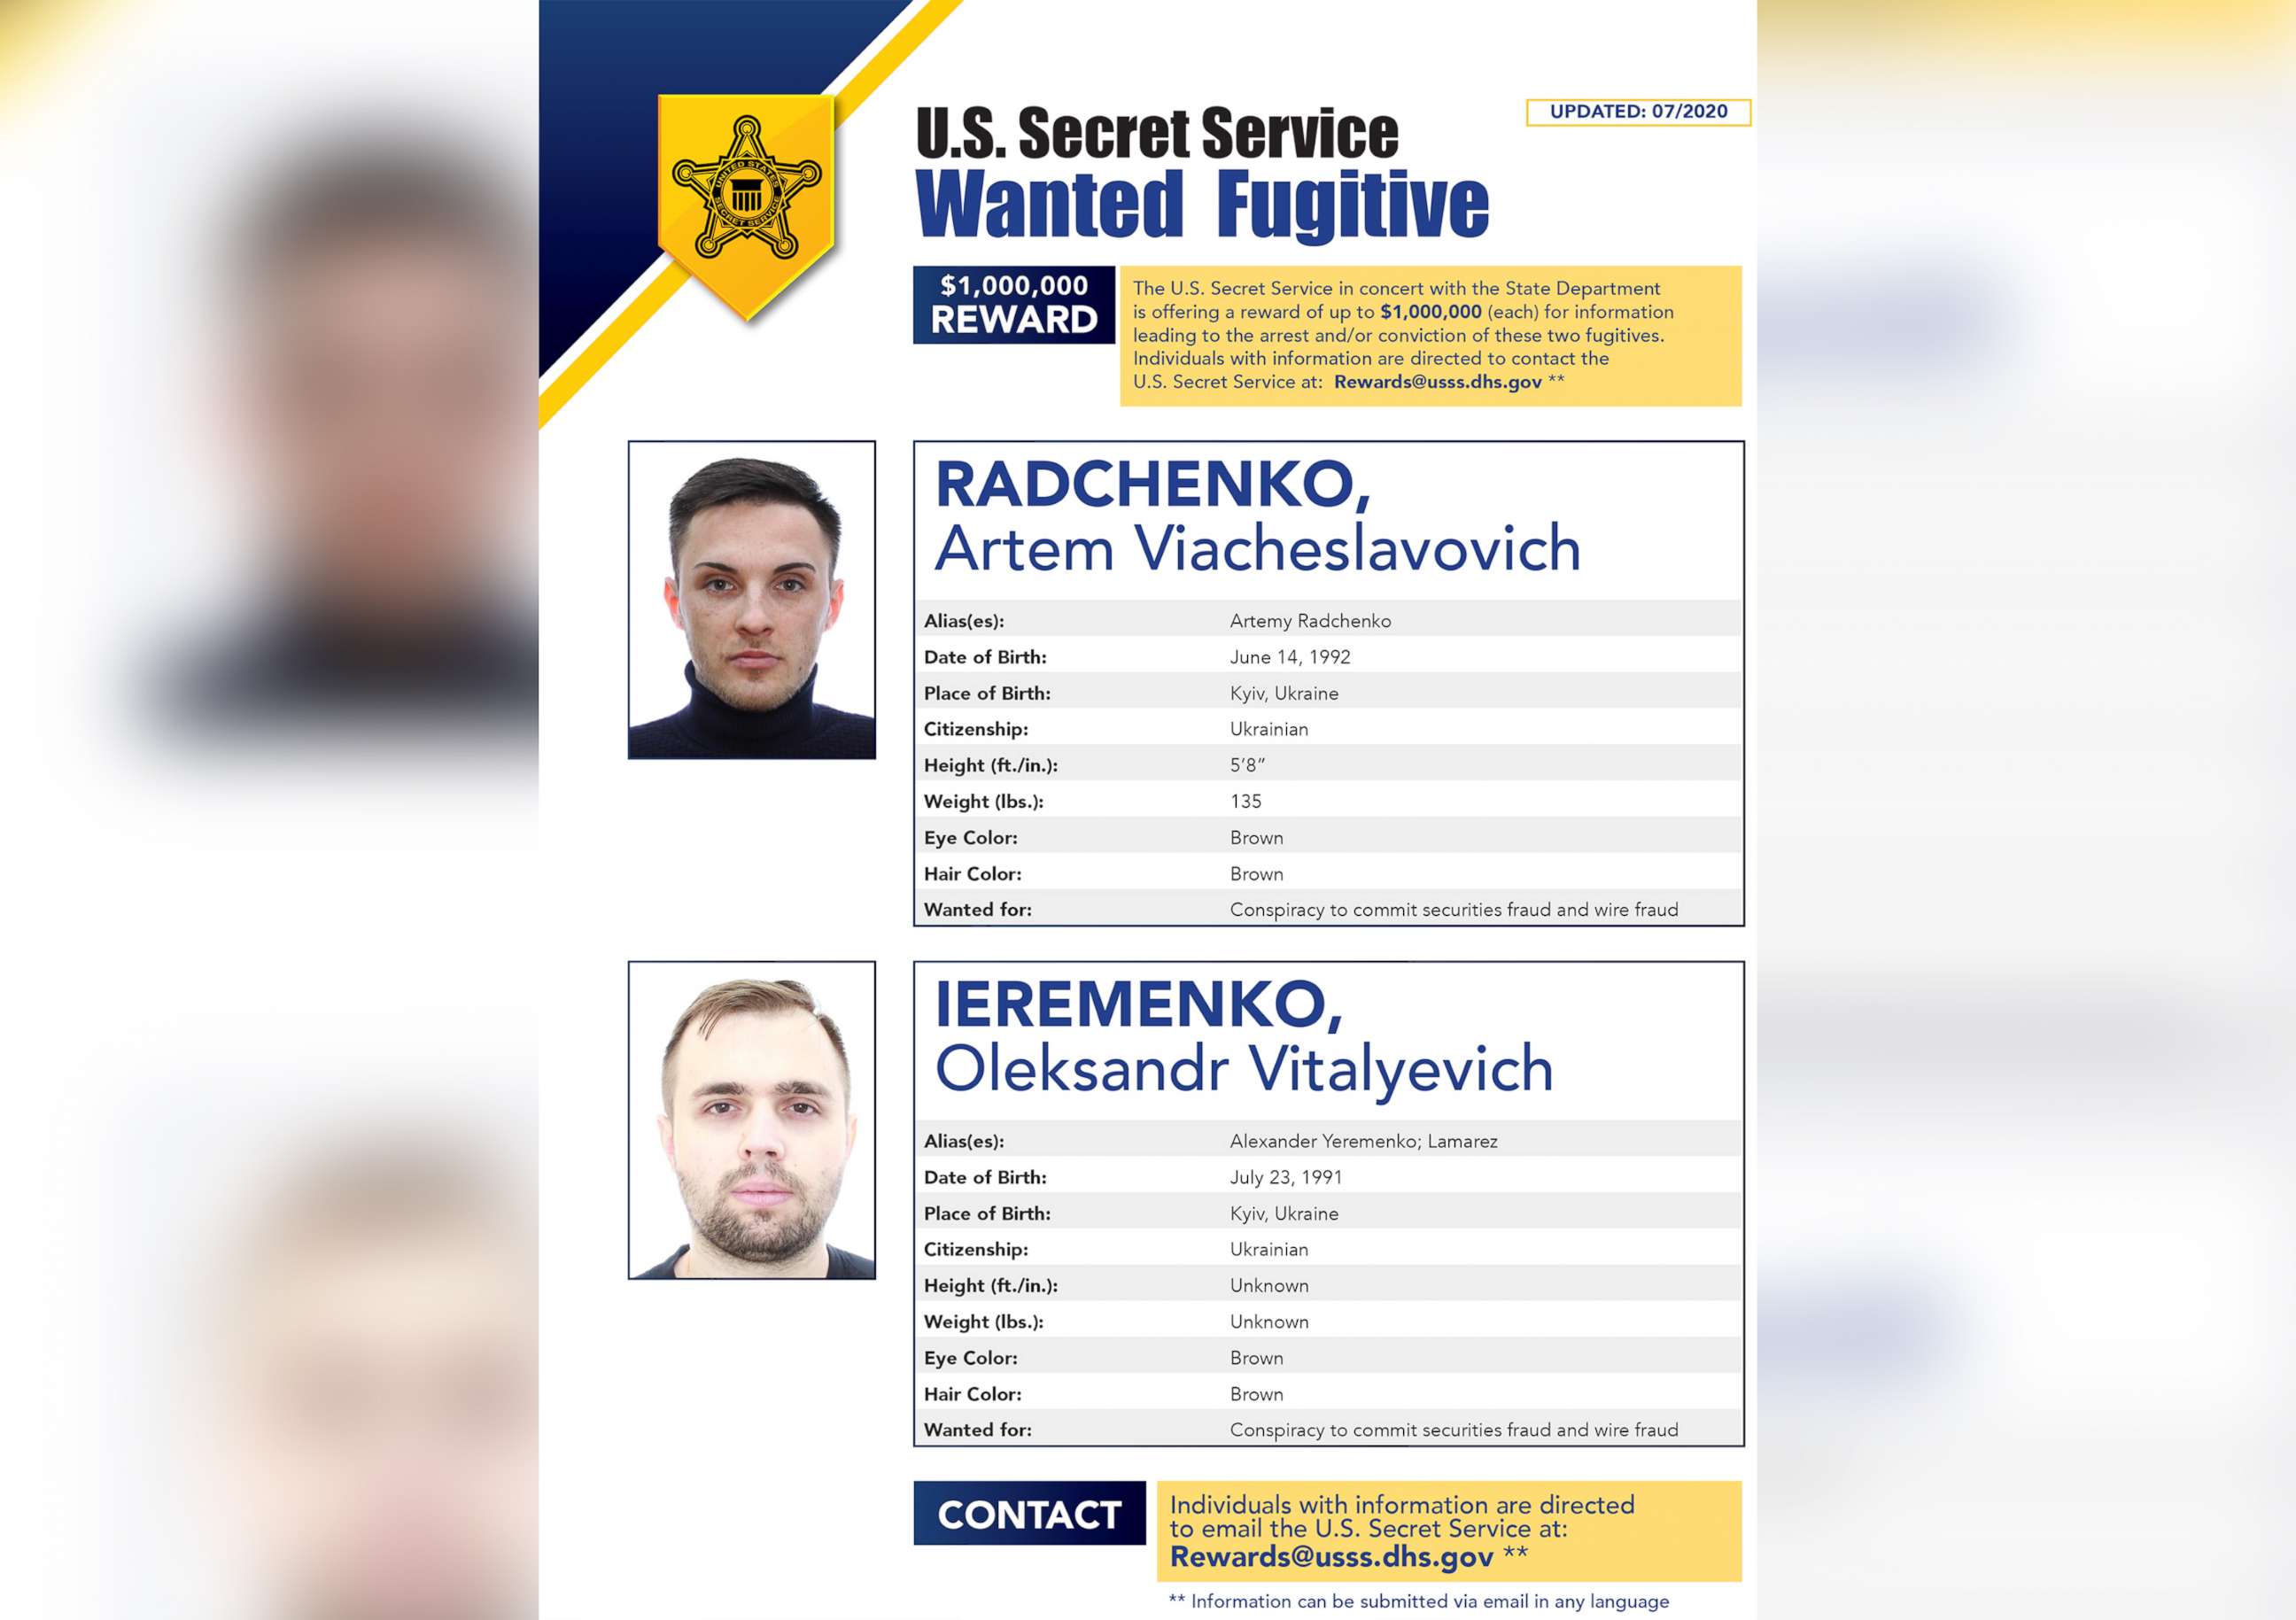 PHOTO: Artem Viacheslavovich Radchenko and Oleksandr Vitalyevich Ieremenko are pictured on a wanted poster released by the U.S. Secret Service in July 2020.